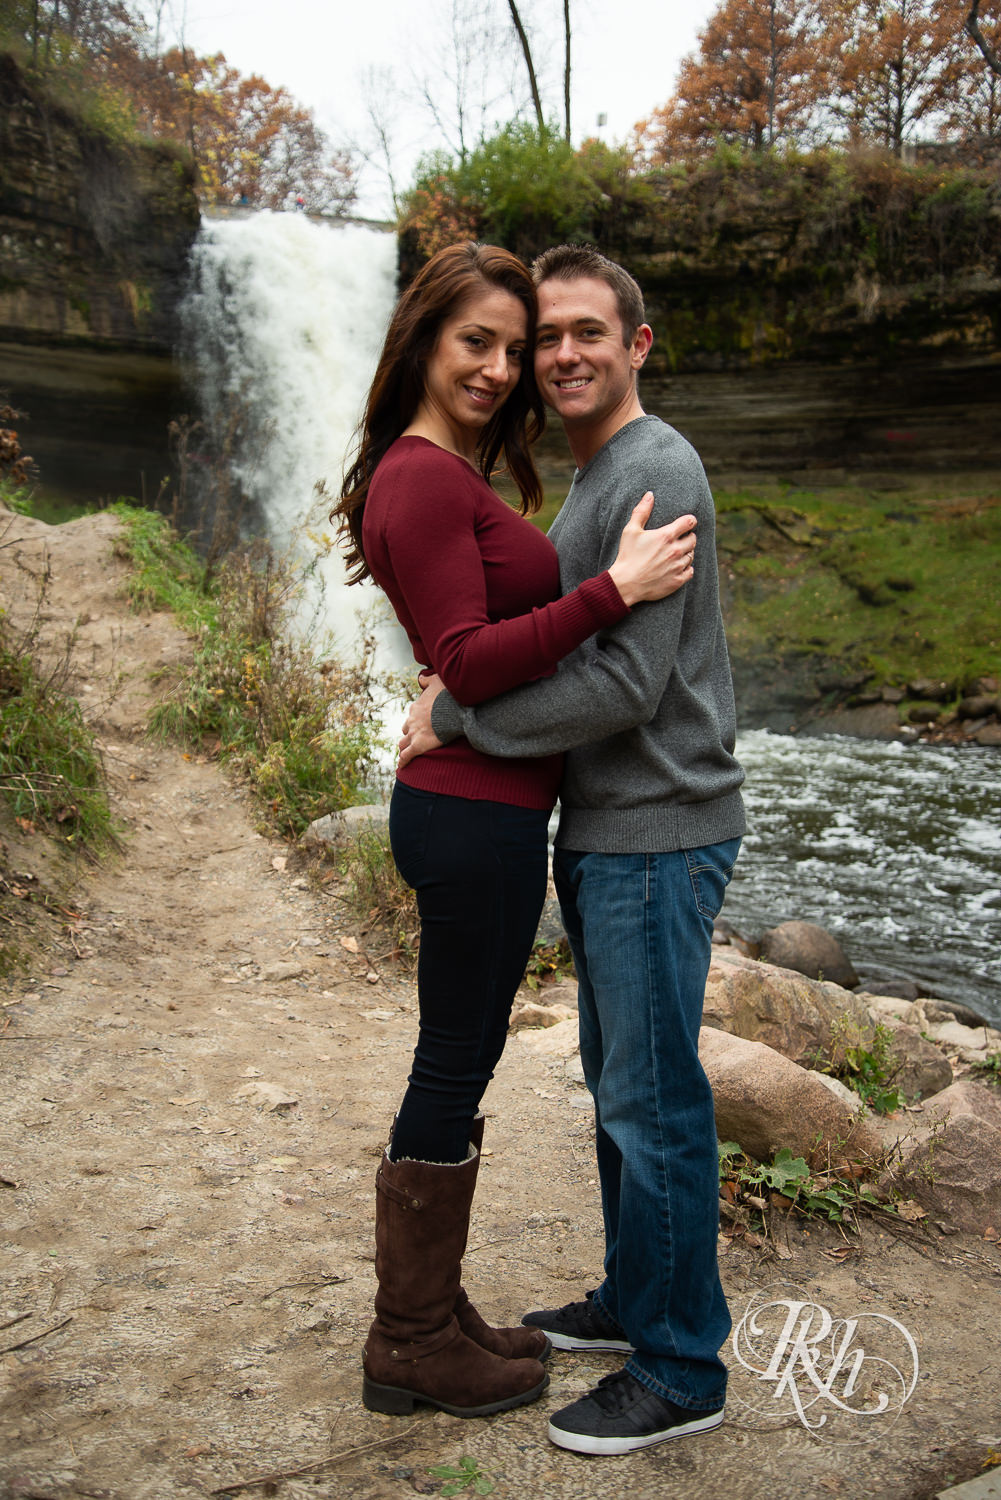 Man and woman smile in front of Minnehaha Falls in Minneapolis, Minnesota.